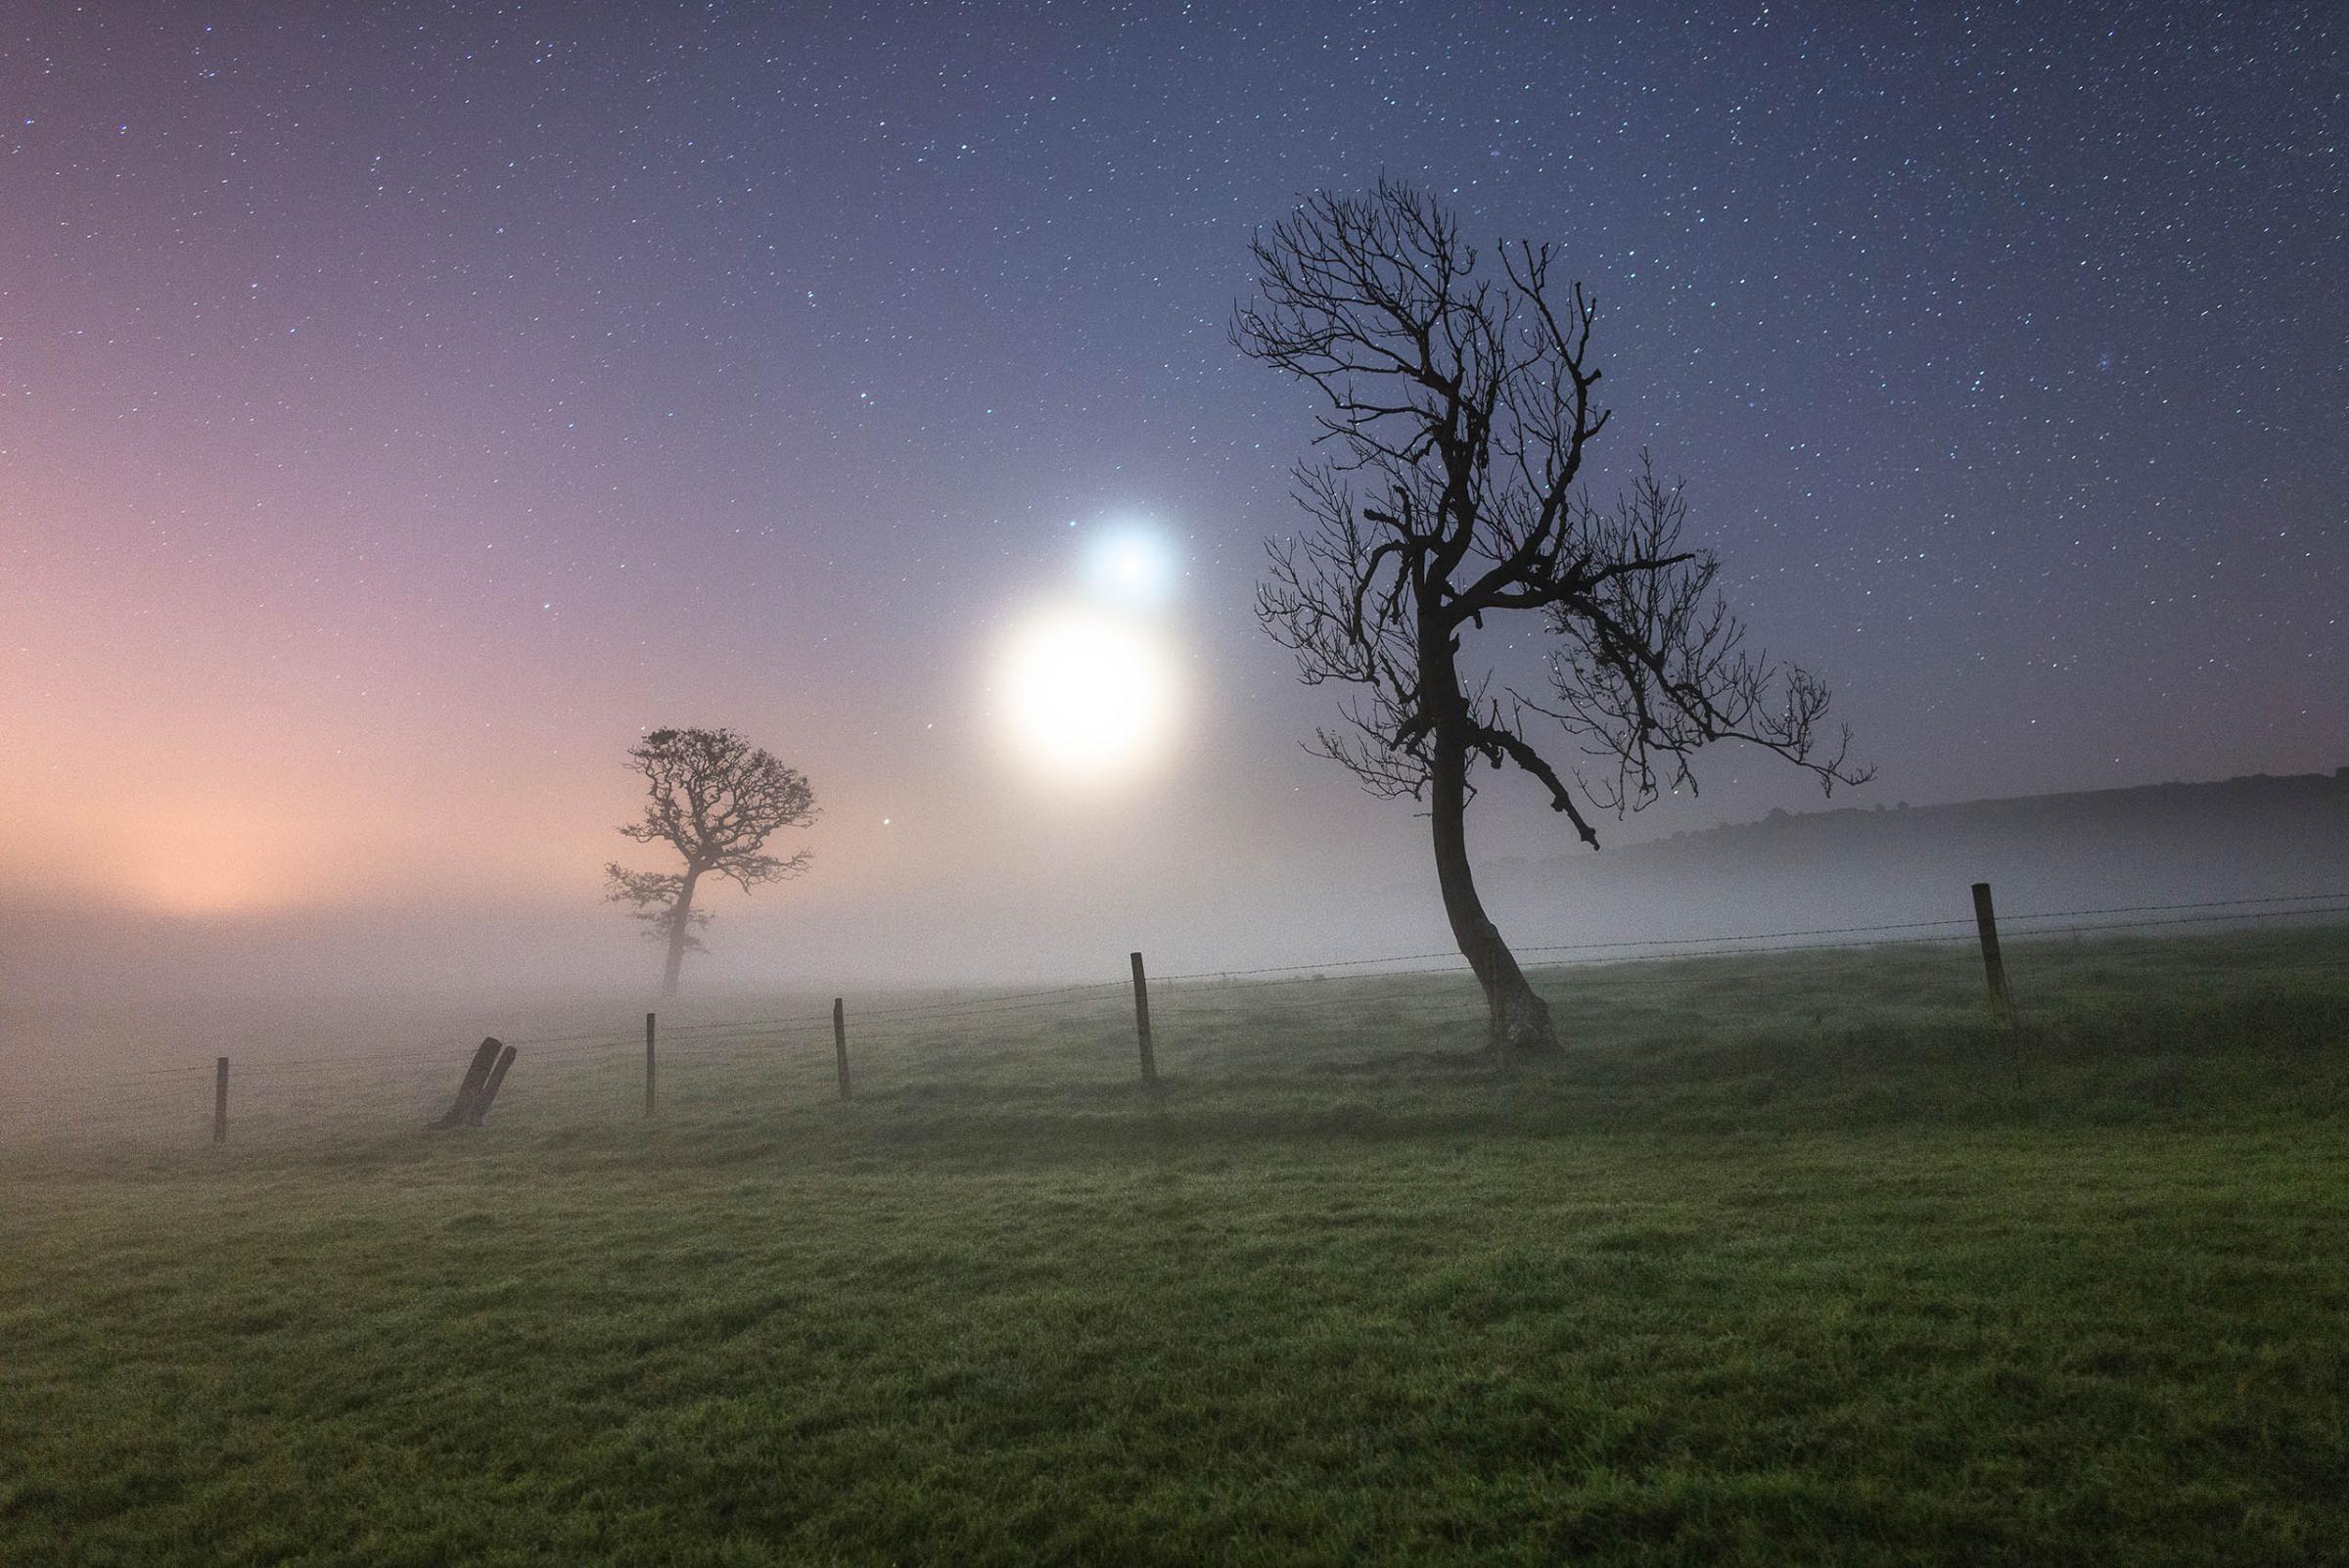 Skyscapes:Ainsley Bennet captured this image of Venus and the crescent Moon on a misty morning on the Isle of Wight in October. The image "looked like something from a science fiction movie, with Binary stars rising from the horizon of an unknown planet," he writes.